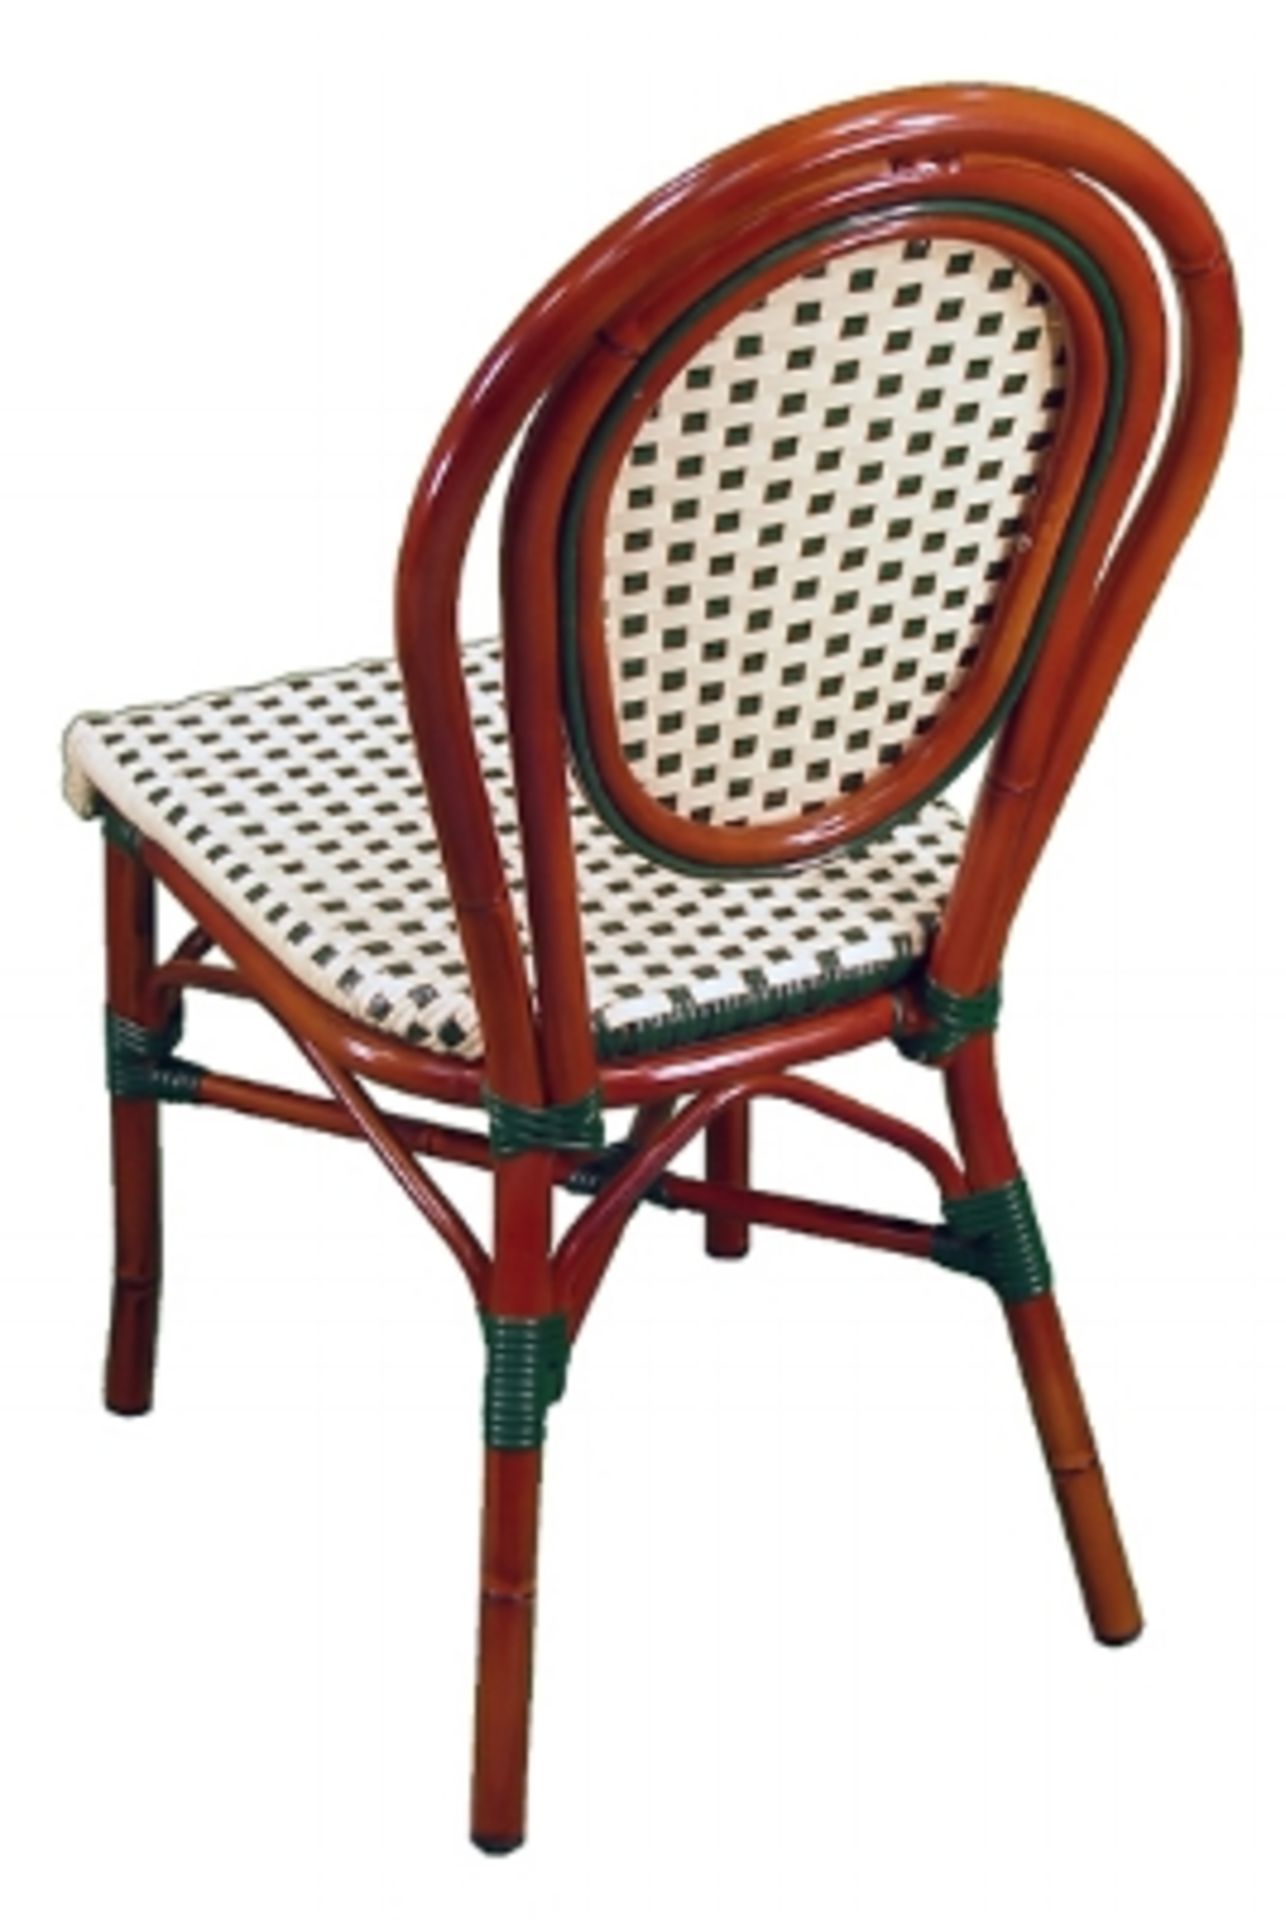 Parisienne Side Chair - Ivory/Green, A57-SC IG. PE Weave on Tubular Aluminum Frame/Powder coat - Image 2 of 7